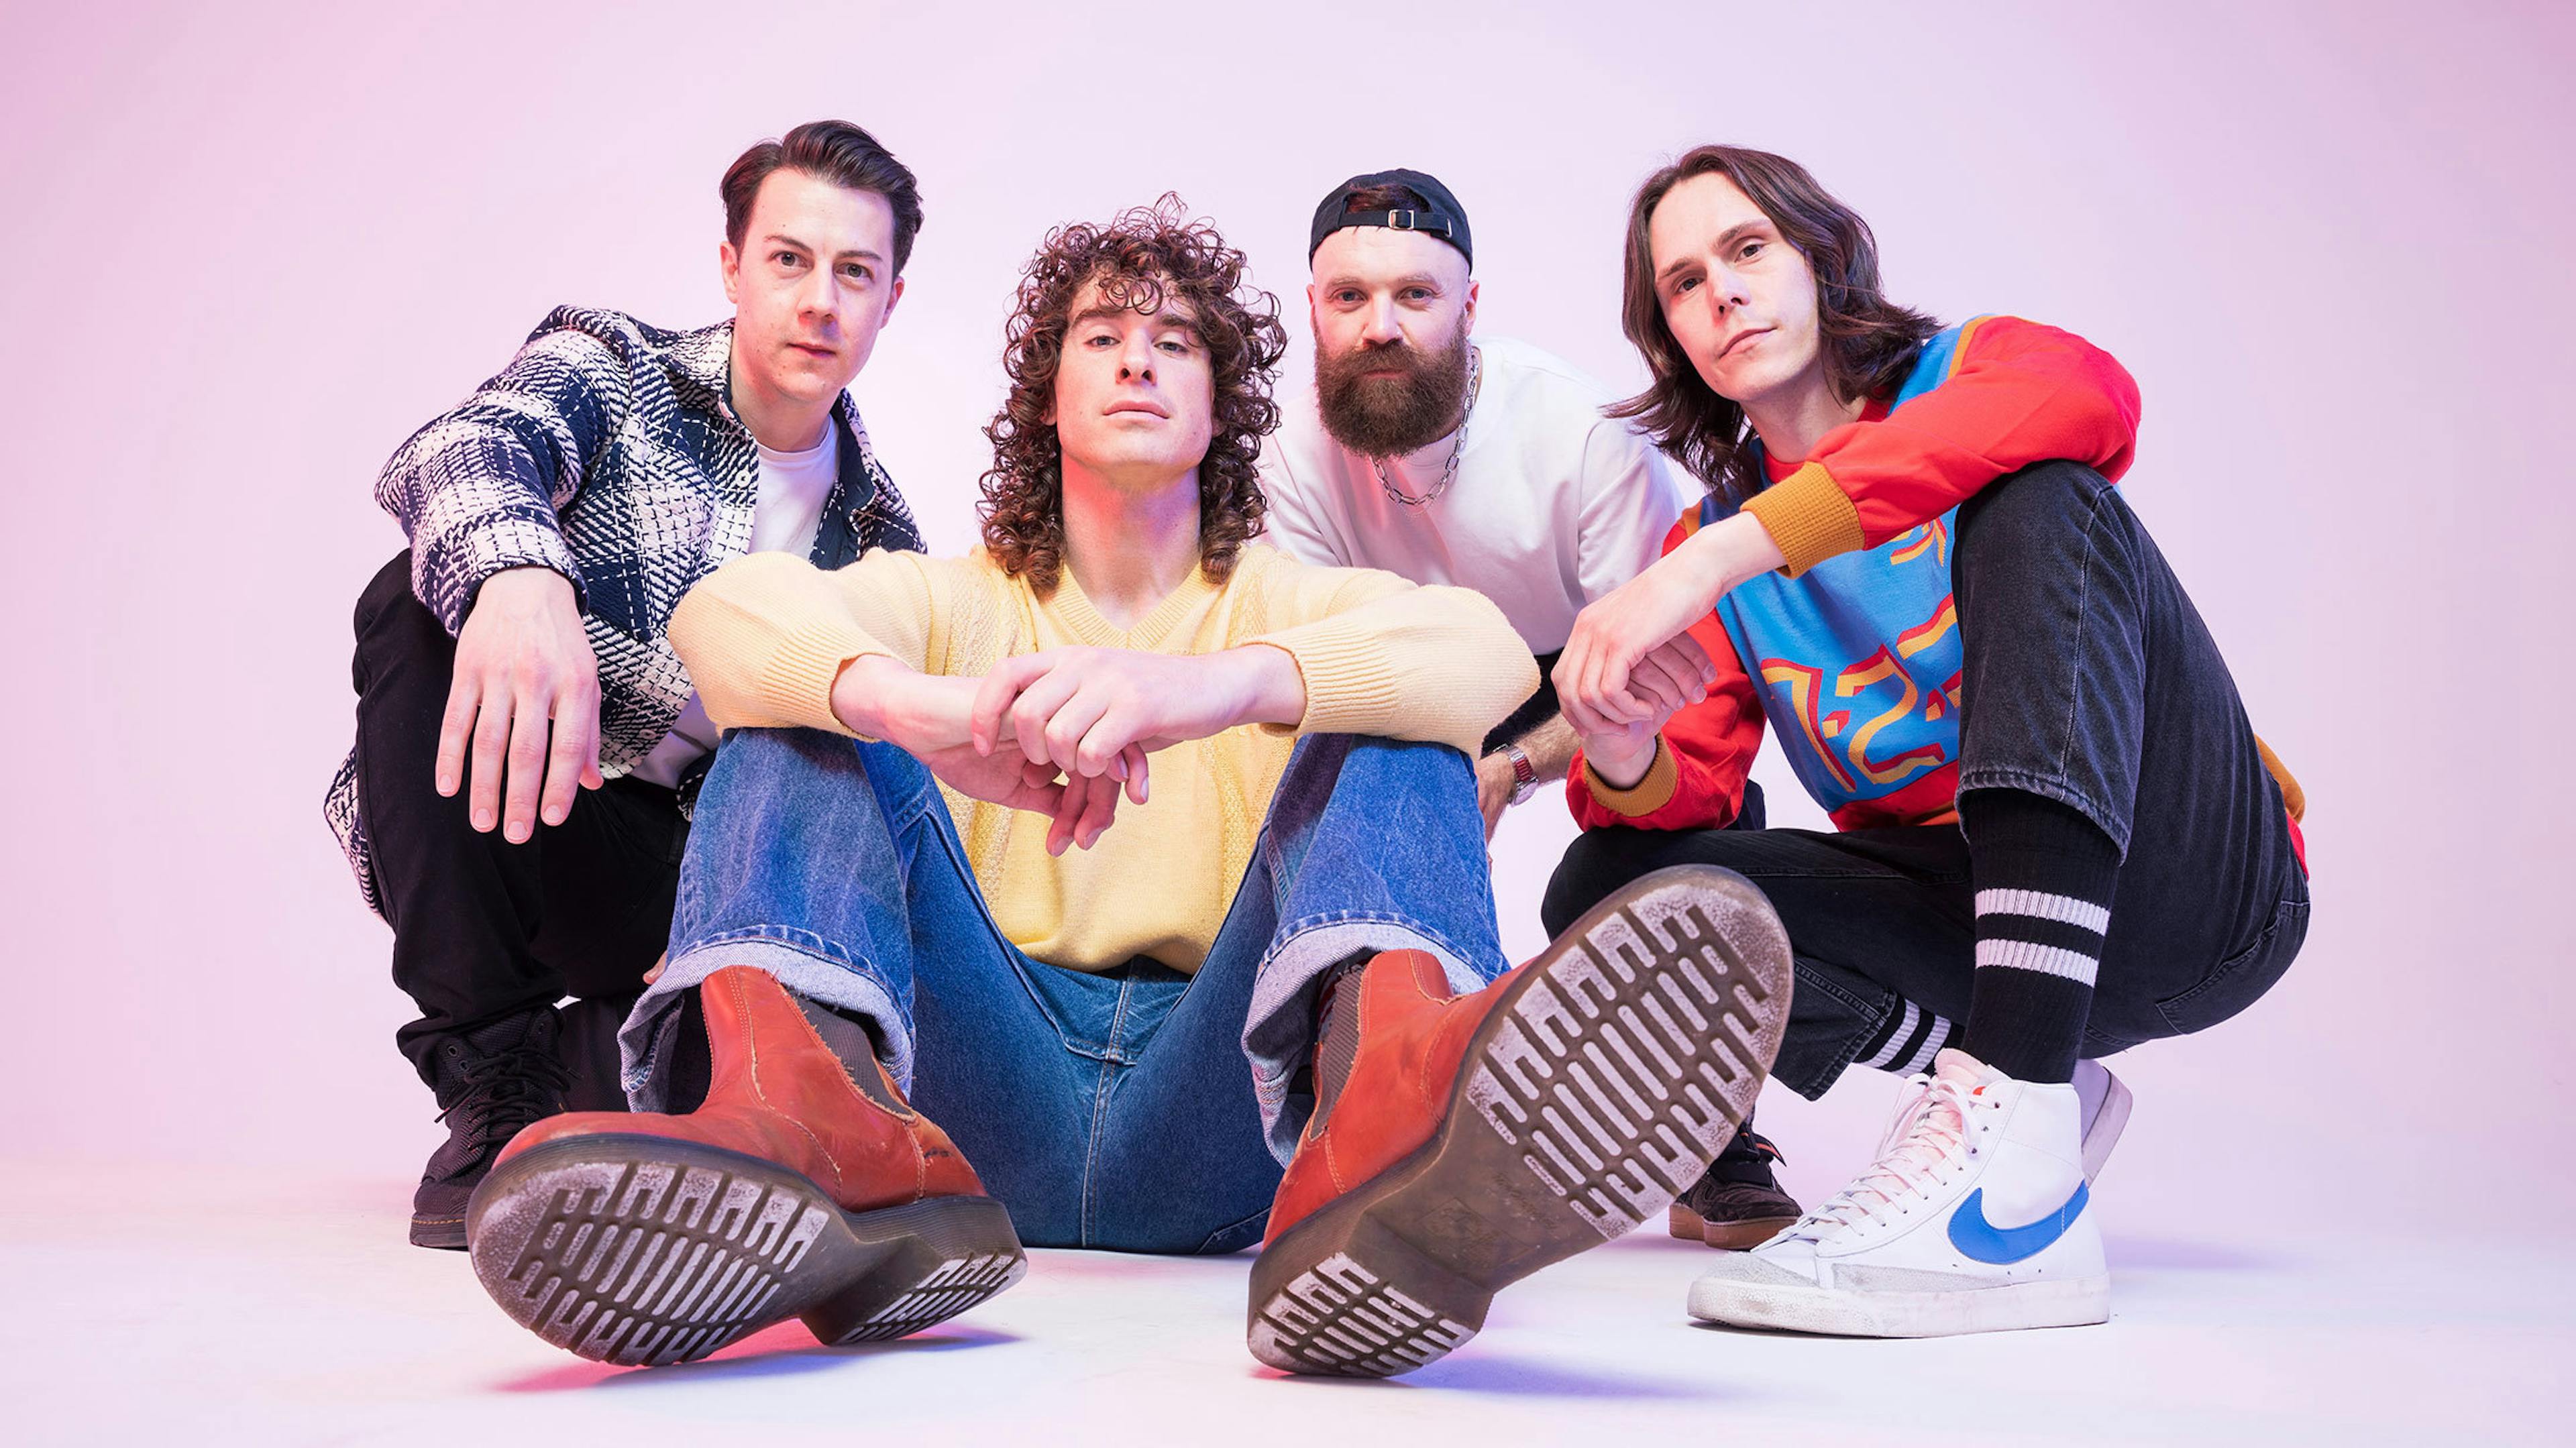 “We’ve wanted to do this forever”: Don Broco talk going orchestral at the Royal Albert Hall